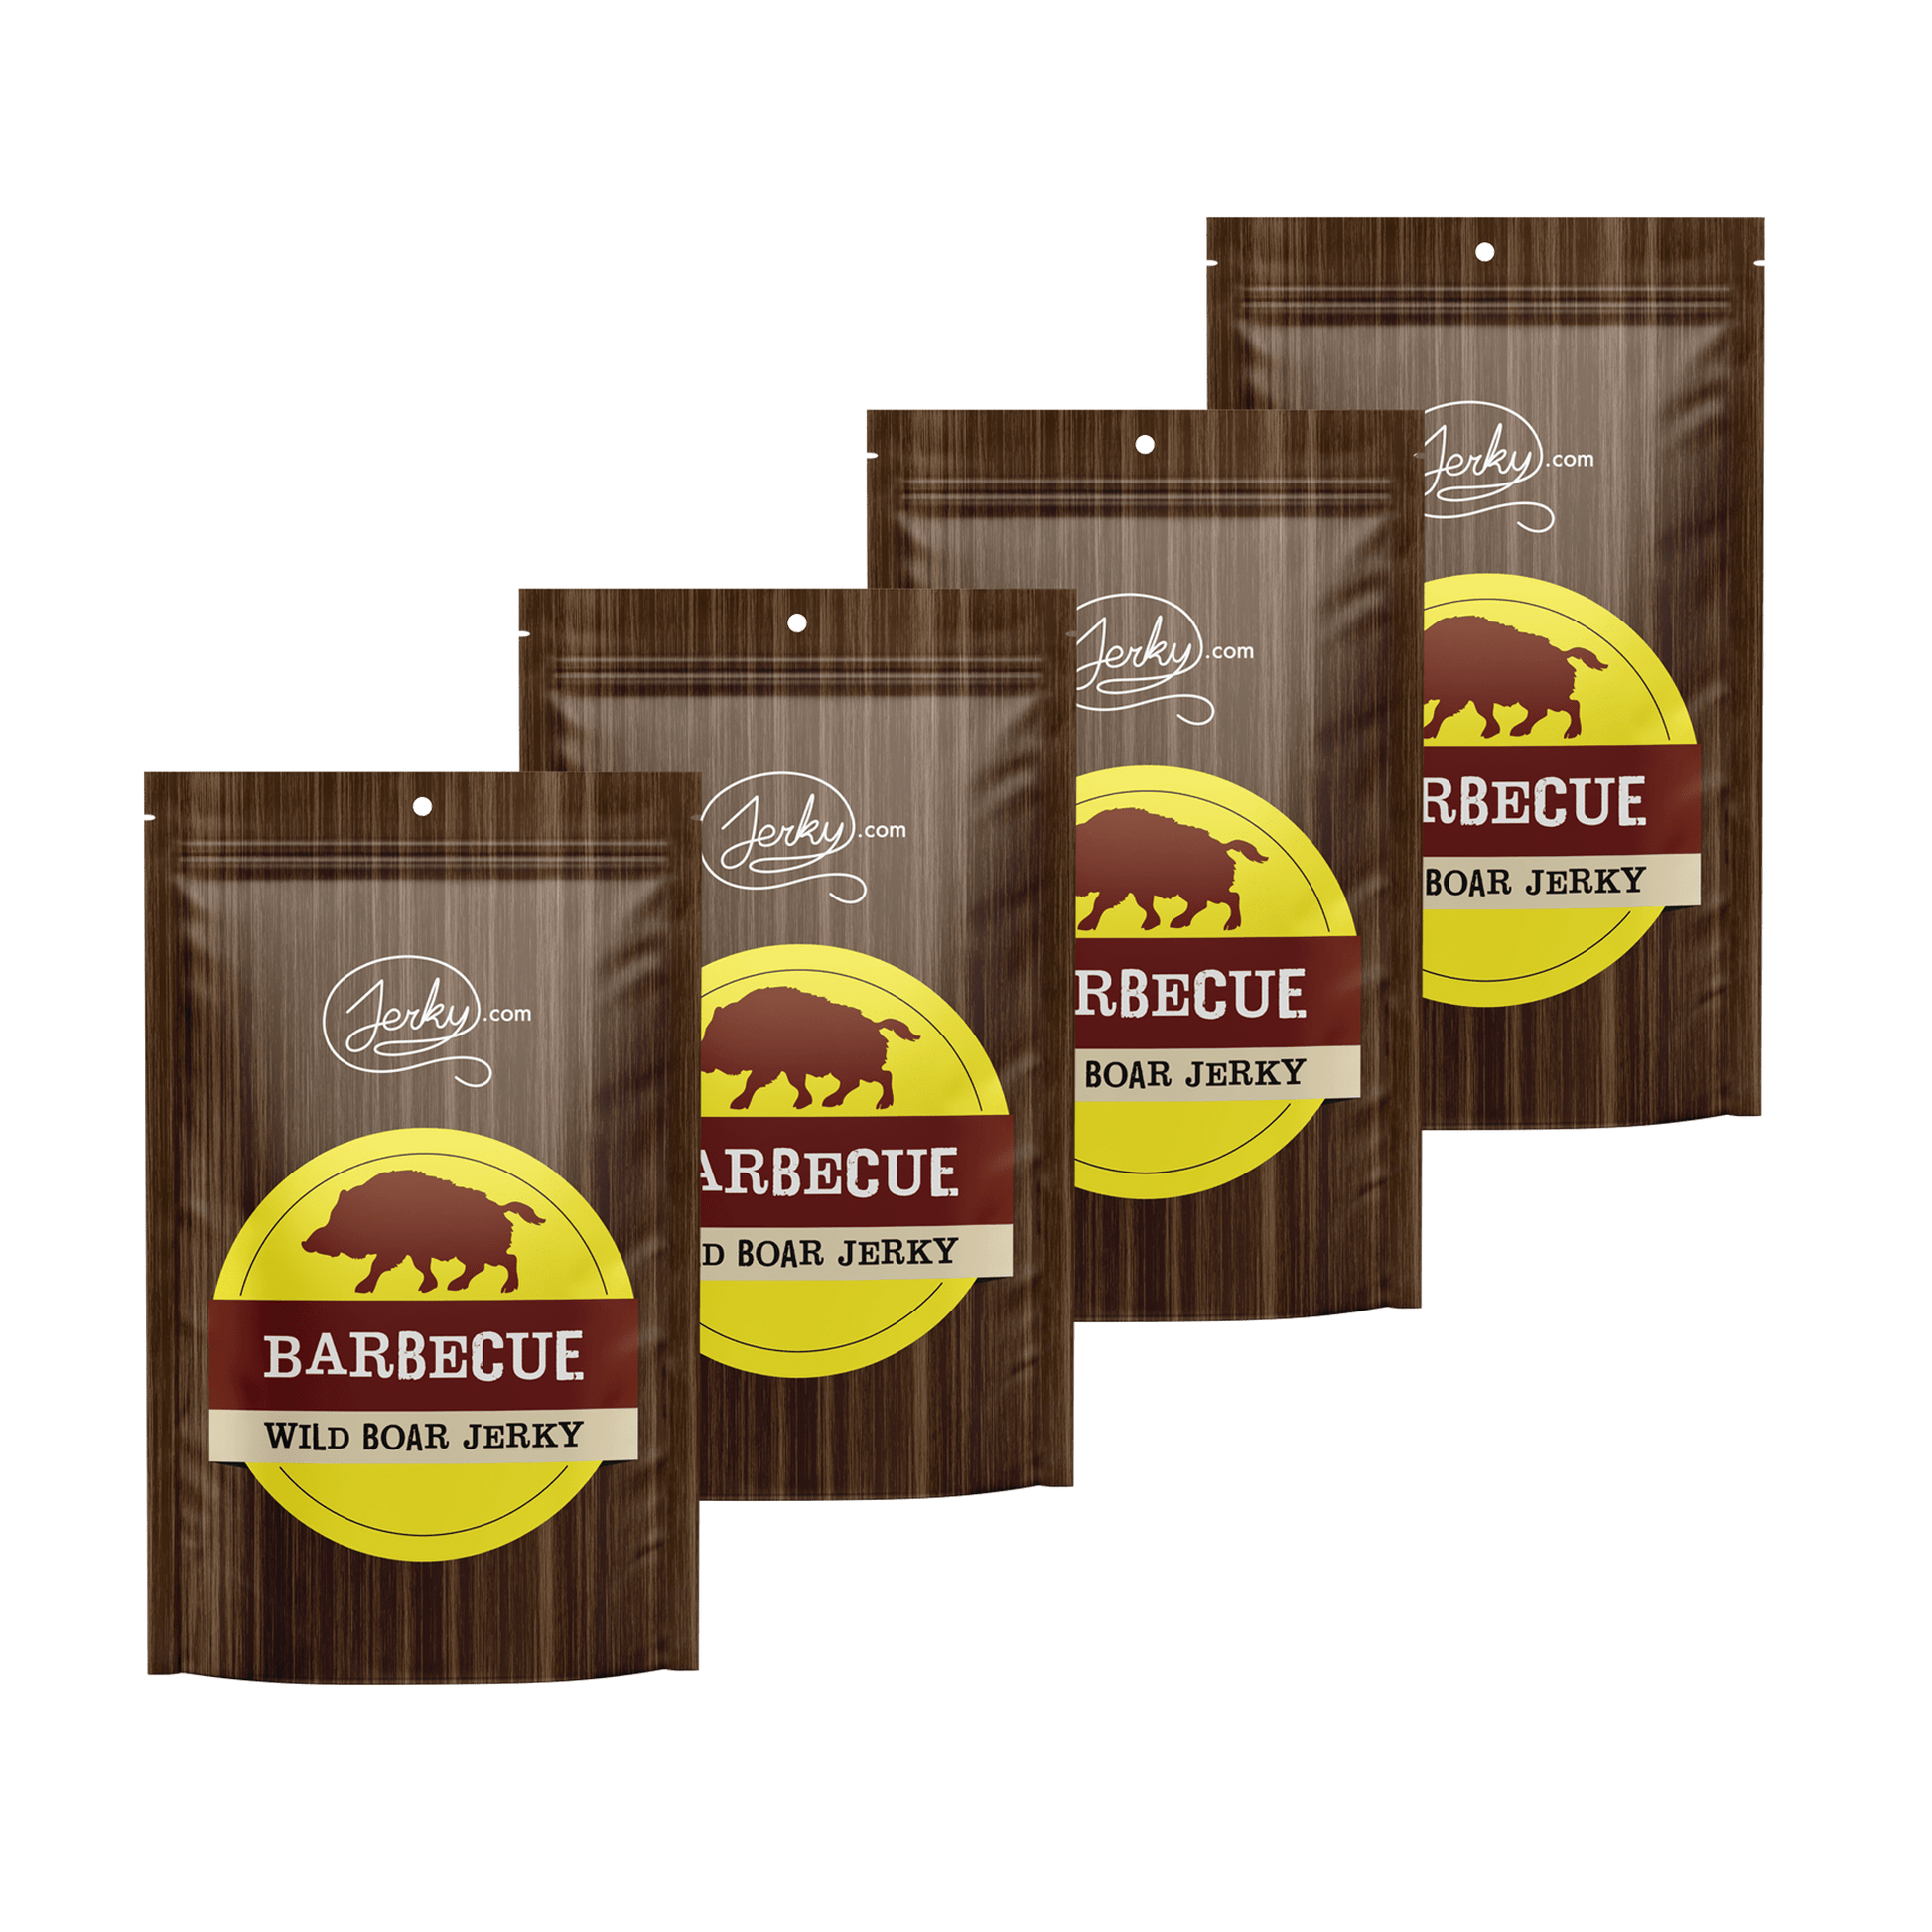 All-Natural Wild Boar Jerky - Barbecue by Jerky.com